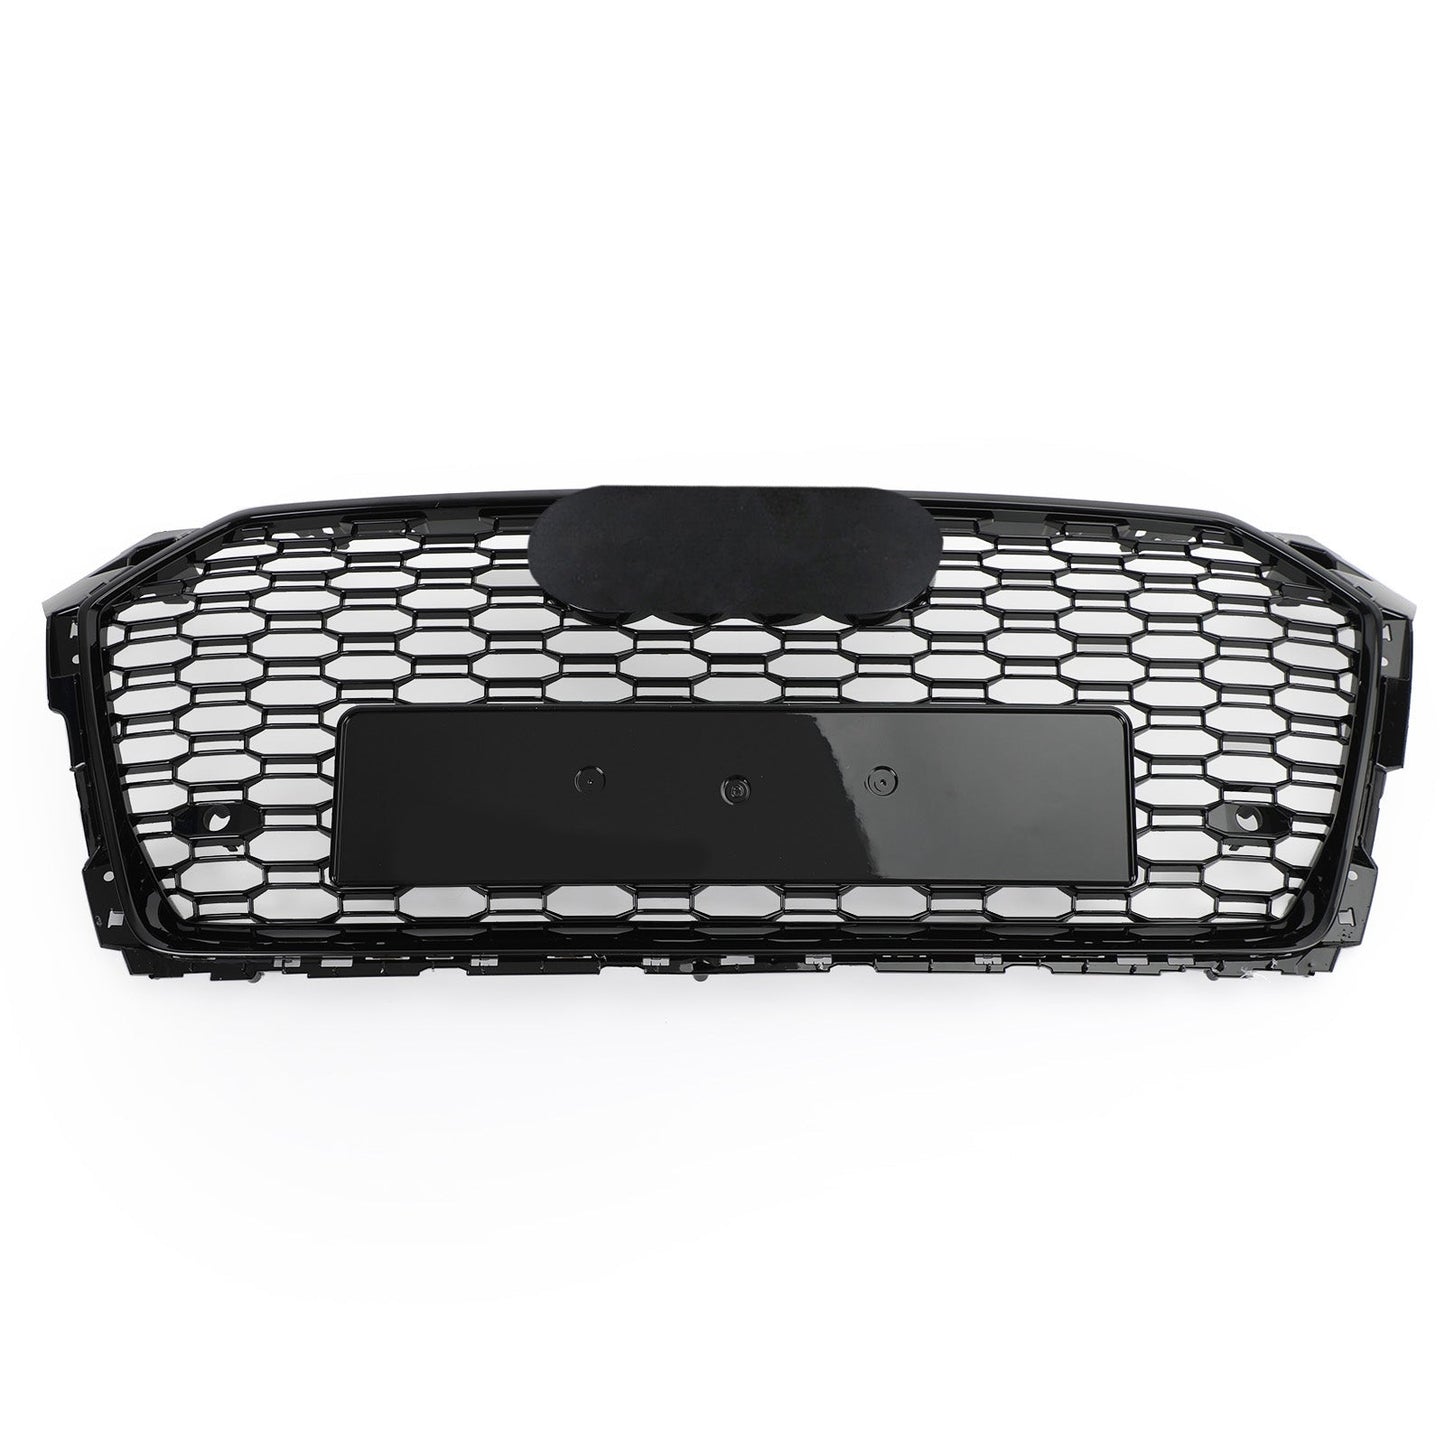 2017-2019 Audi A5/A5 Quattro/A5 Sportback/S5 Honeycomb RS5 Style Honeycomb Sport Mesh Hex Grille Grill Generico